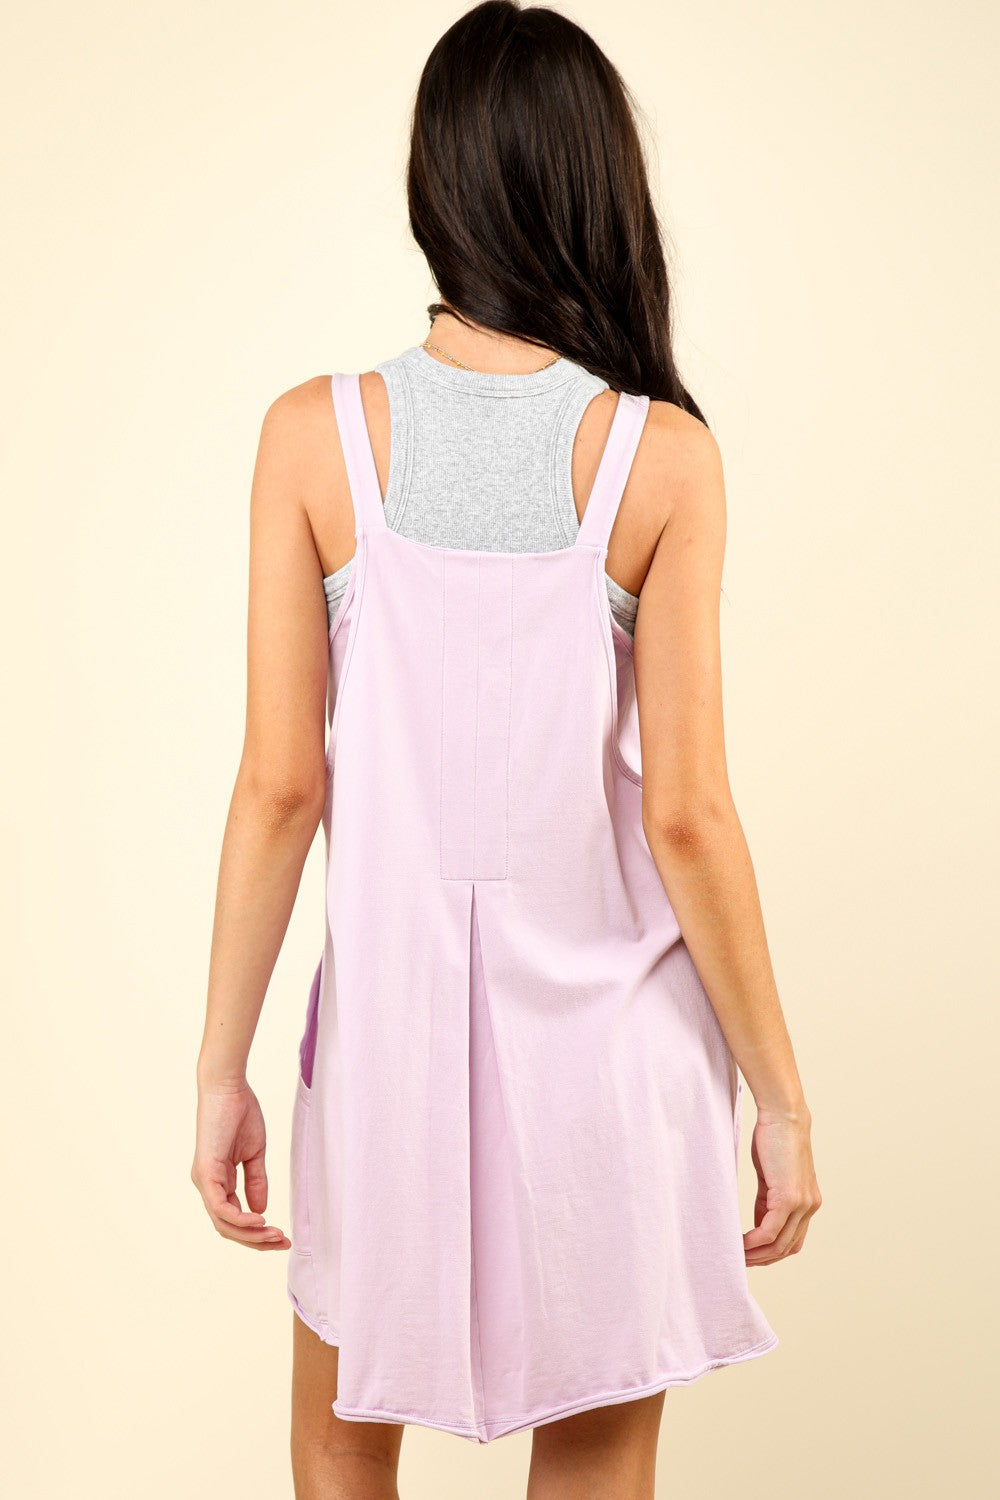 Orchid Athletic Dress